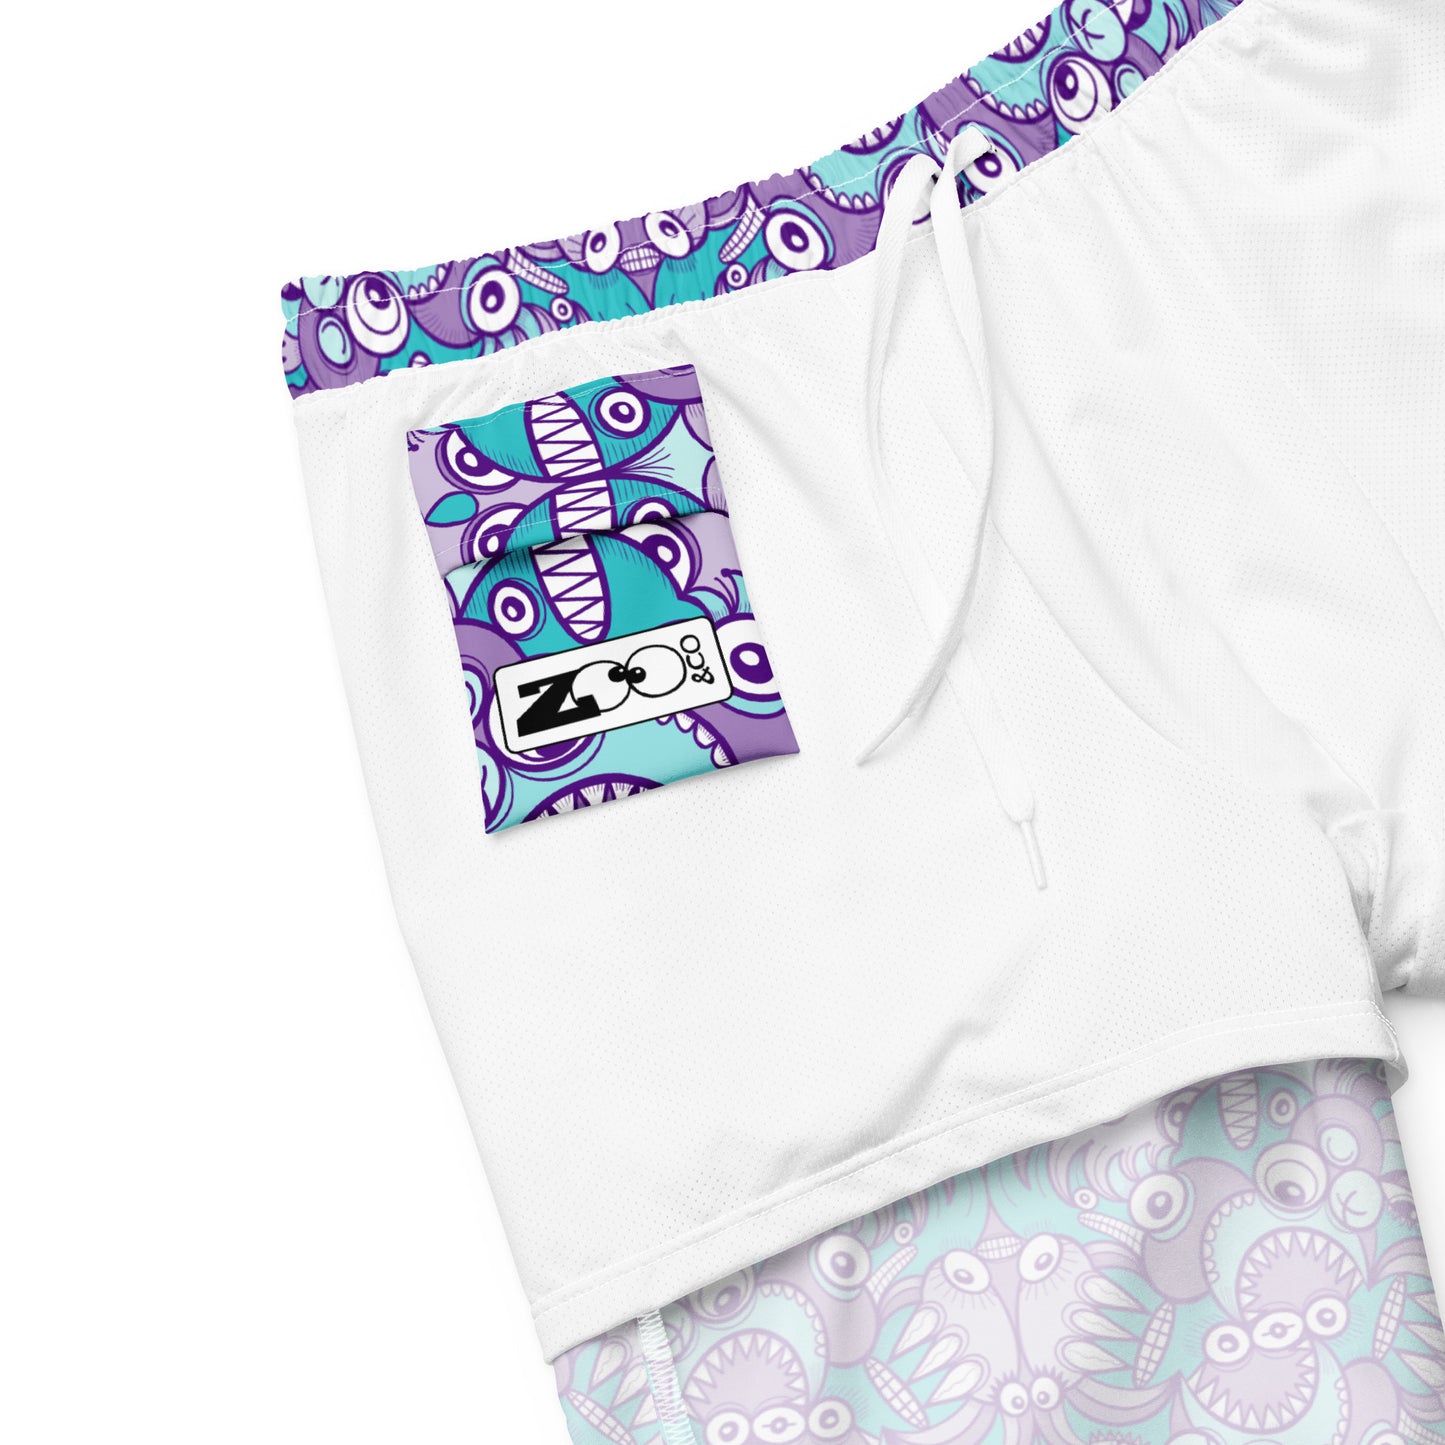 Planet 5: Aquatic Creatures from the Doodles of the Galaxy - Men's swim trunks. Product details. Interior pocket